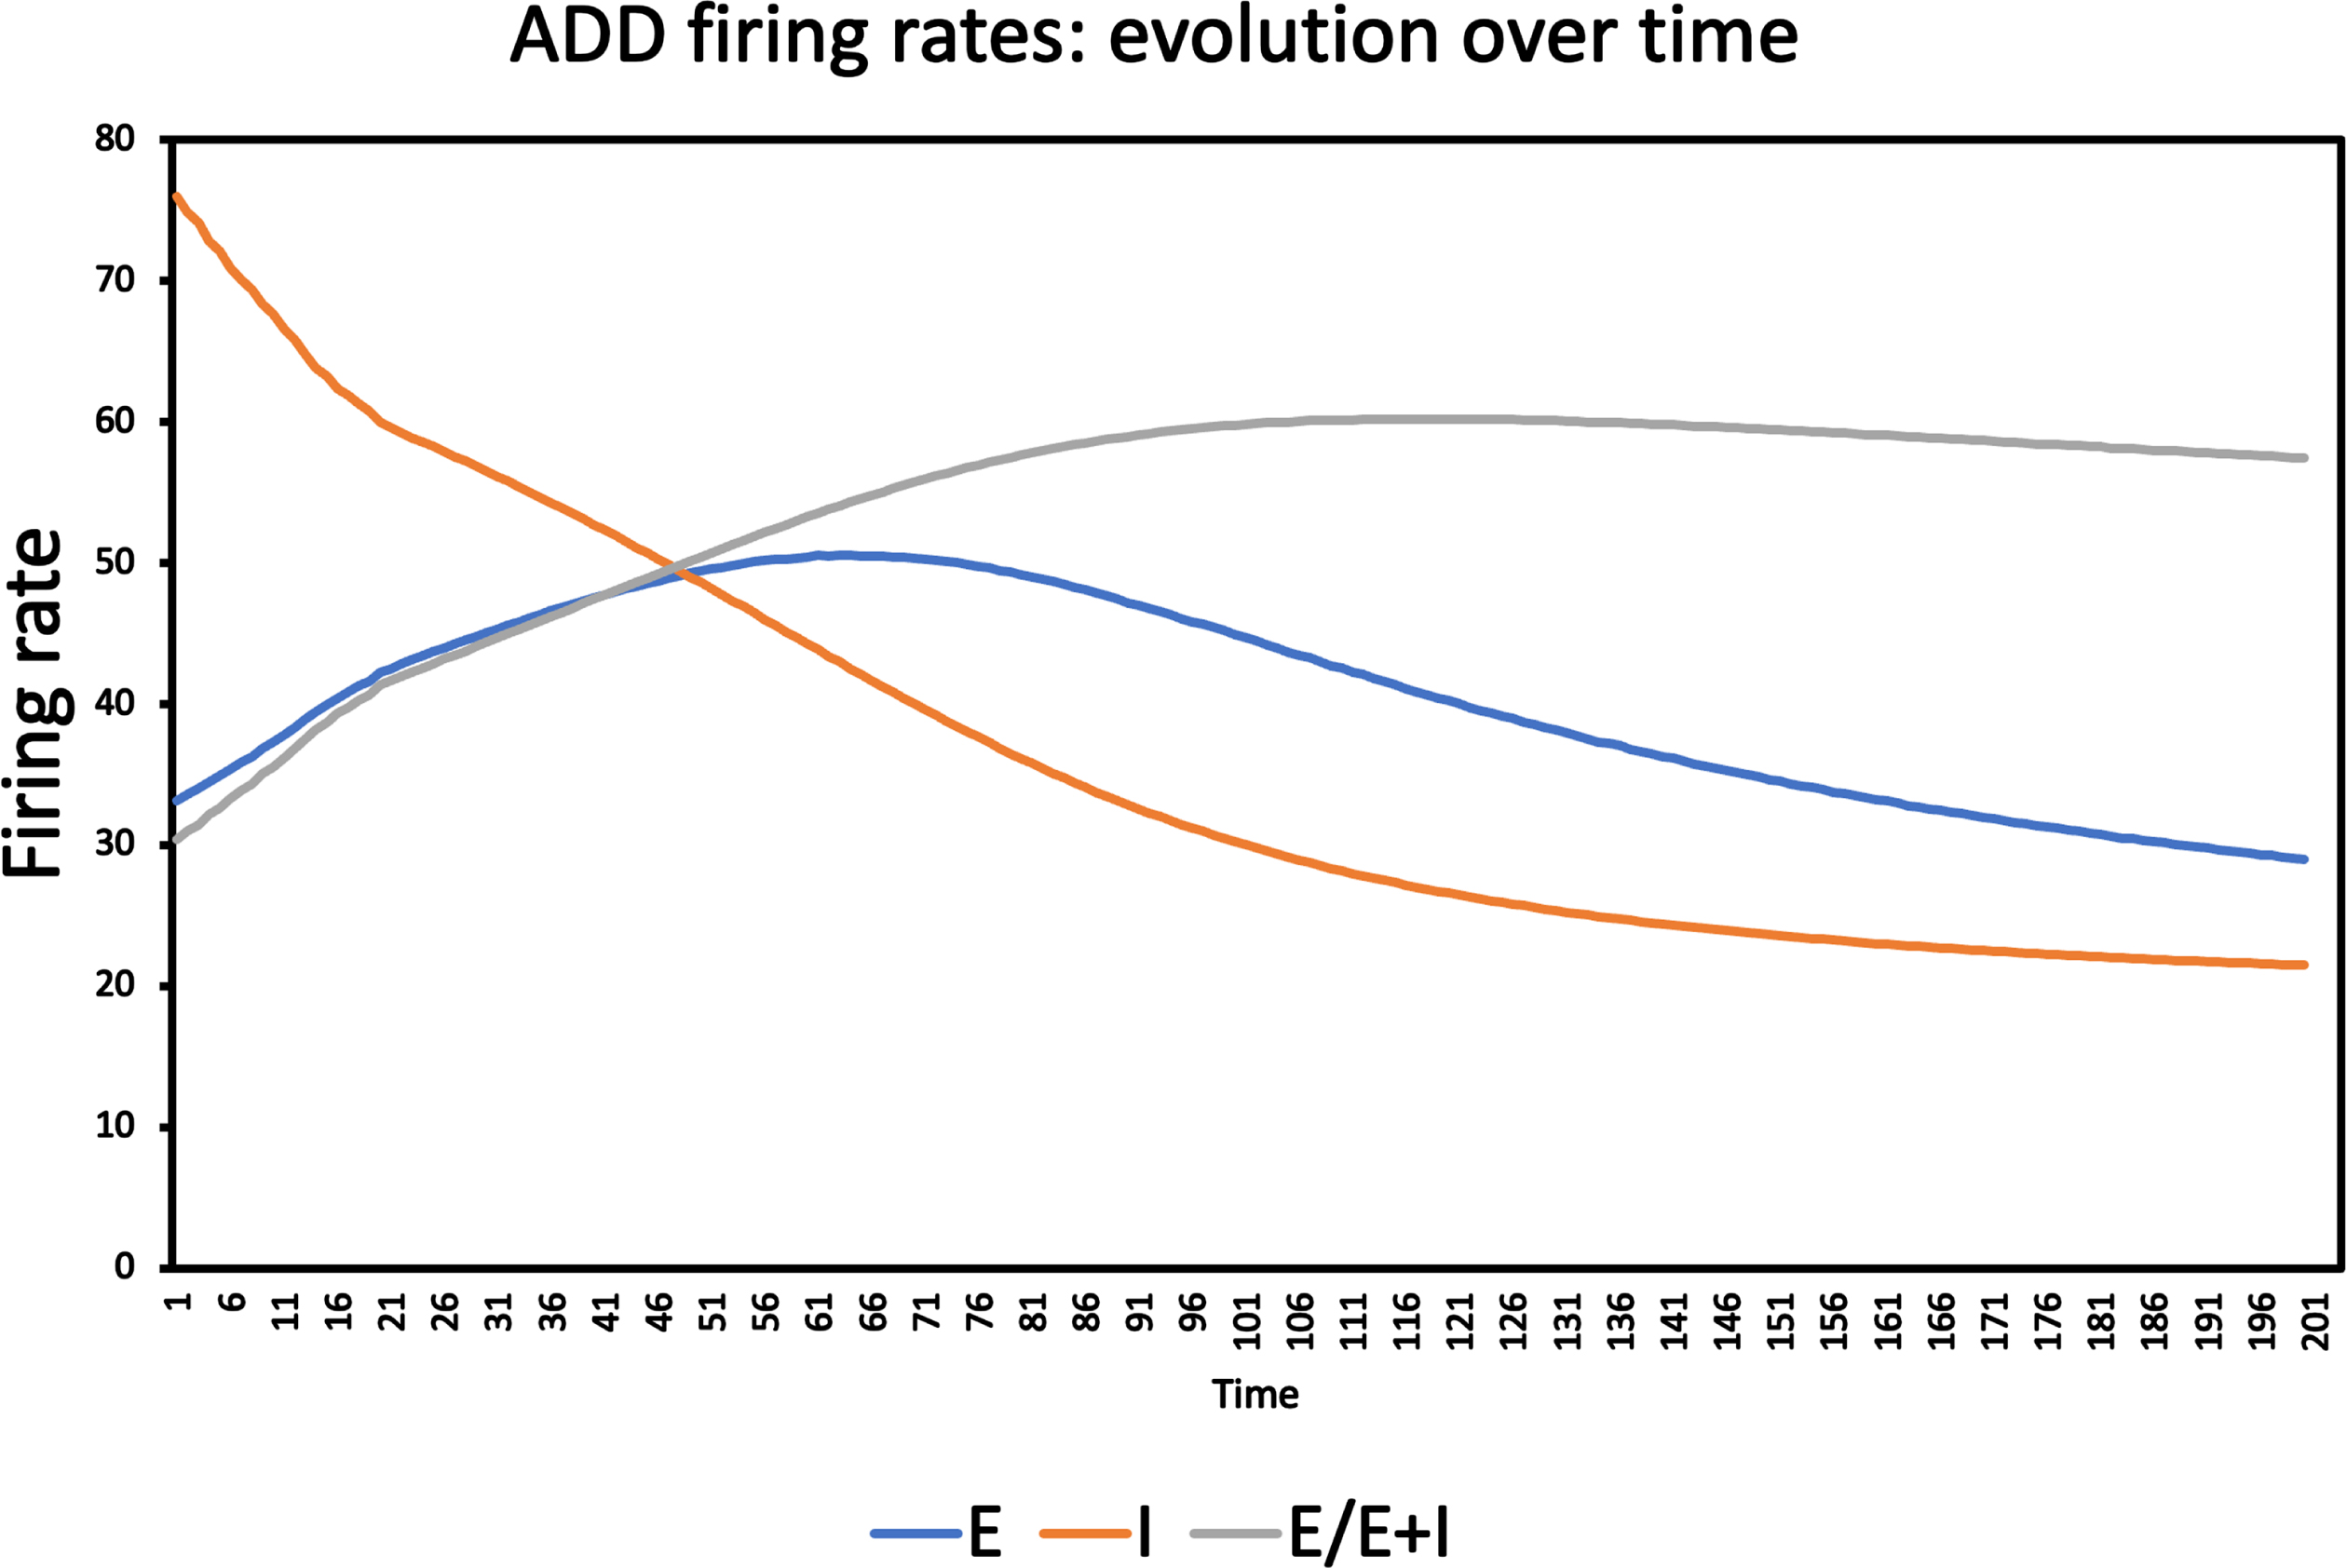 Time course of firing rates (spikes / sec.) of excitatory and inhibitory neurons, and E/I balance, averaged over all 78 neural masses, corresponding to the same model run as Fig. 3. The firing rate of the excitatory neurons shows an increase to a highest value around time step 60, followed by a gradual decline, and a final value below the initial value. The inhibitory neurons have much higher firing rates initially, and show a steady, approximately exponential decline before they reach a more or less table plateau at the end of the simulation. The E/I balance, computed as the ratio of the firing rates of excitatory neurons divided by the sum of excitatory and inhibitory firing rates, shows an almost linear increase from the start until it reaches a plateau after about 100 timesteps.